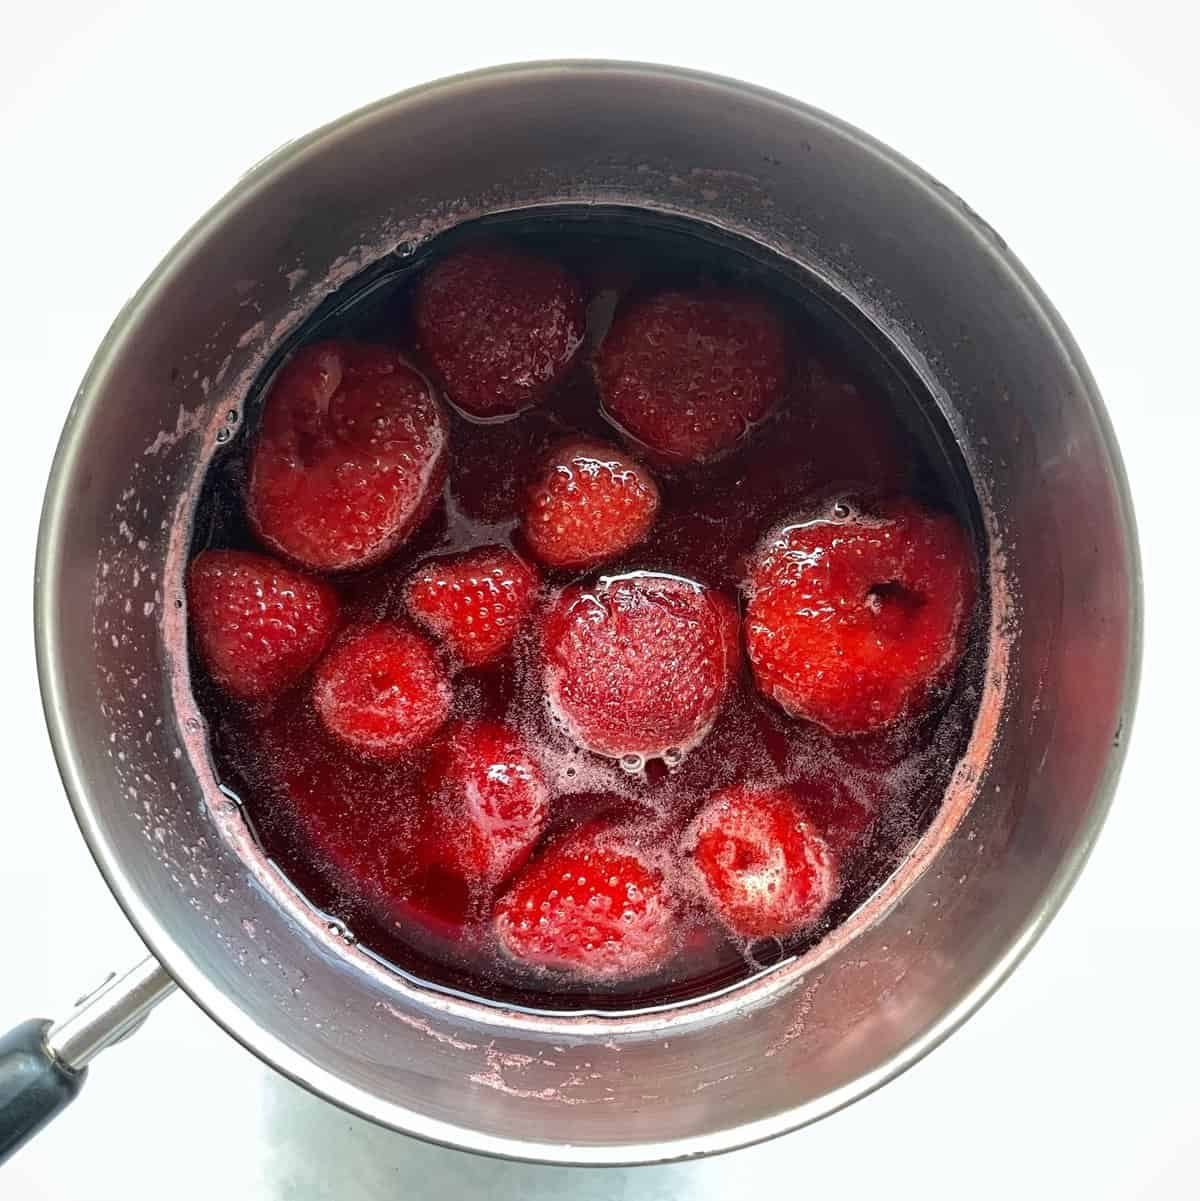 whole strawberries in a pot coated with red syrup.